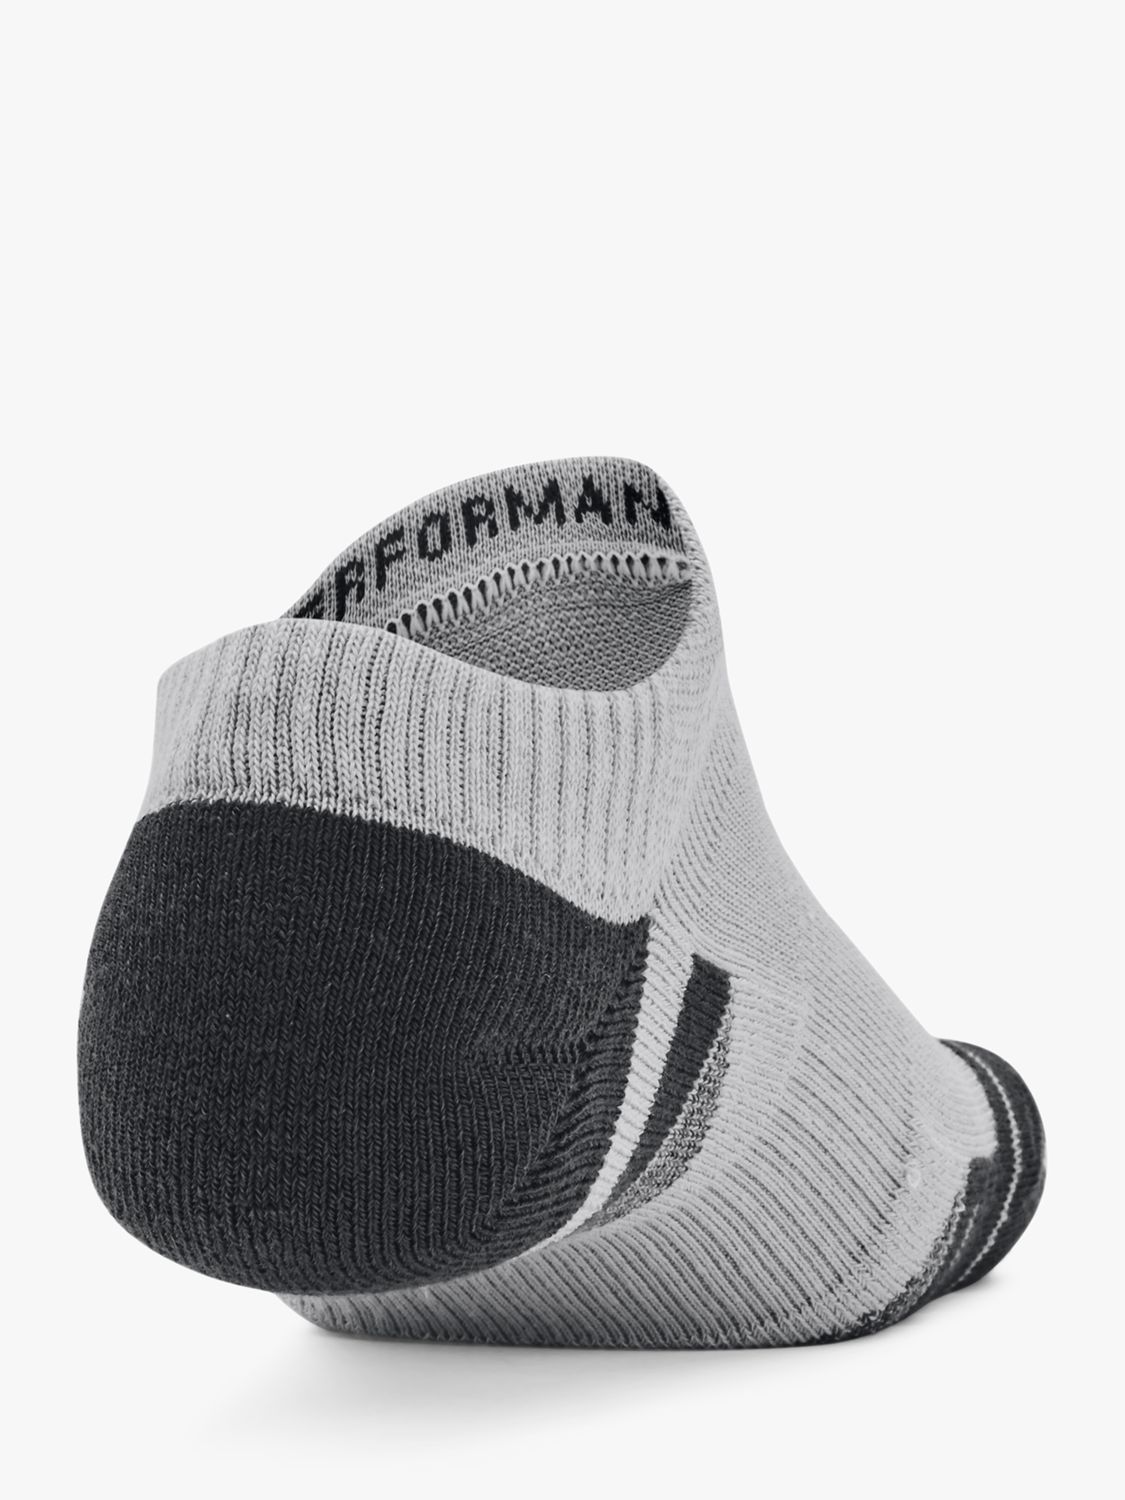 Buy Under Armour Performance Tech Socks, Pack of 3 Online at johnlewis.com